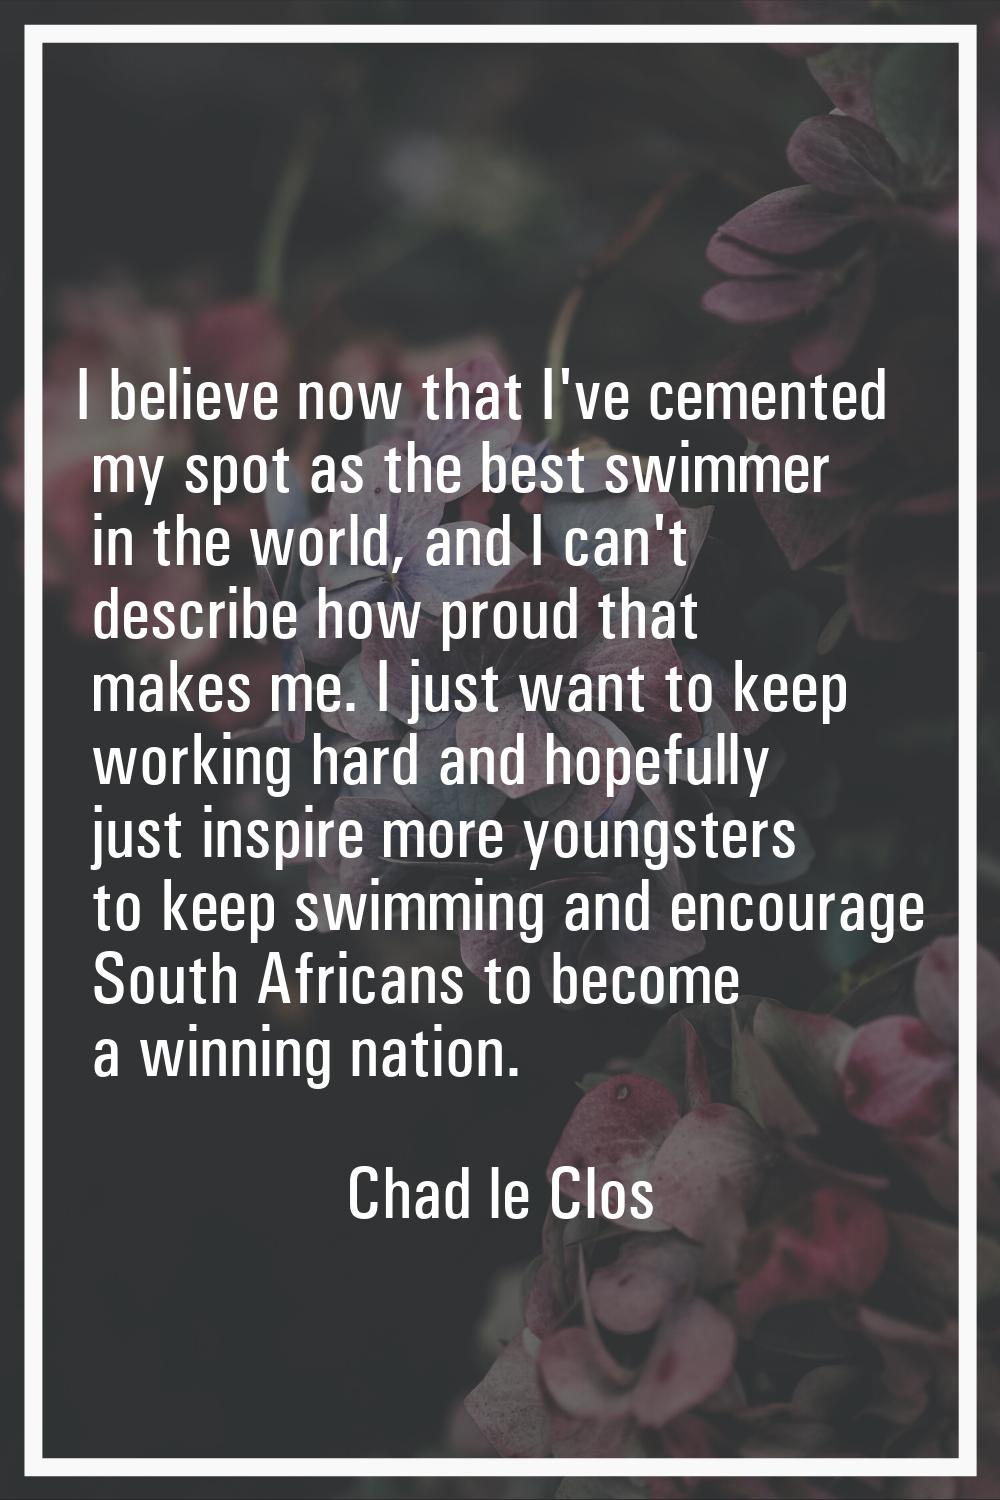 I believe now that I've cemented my spot as the best swimmer in the world, and I can't describe how